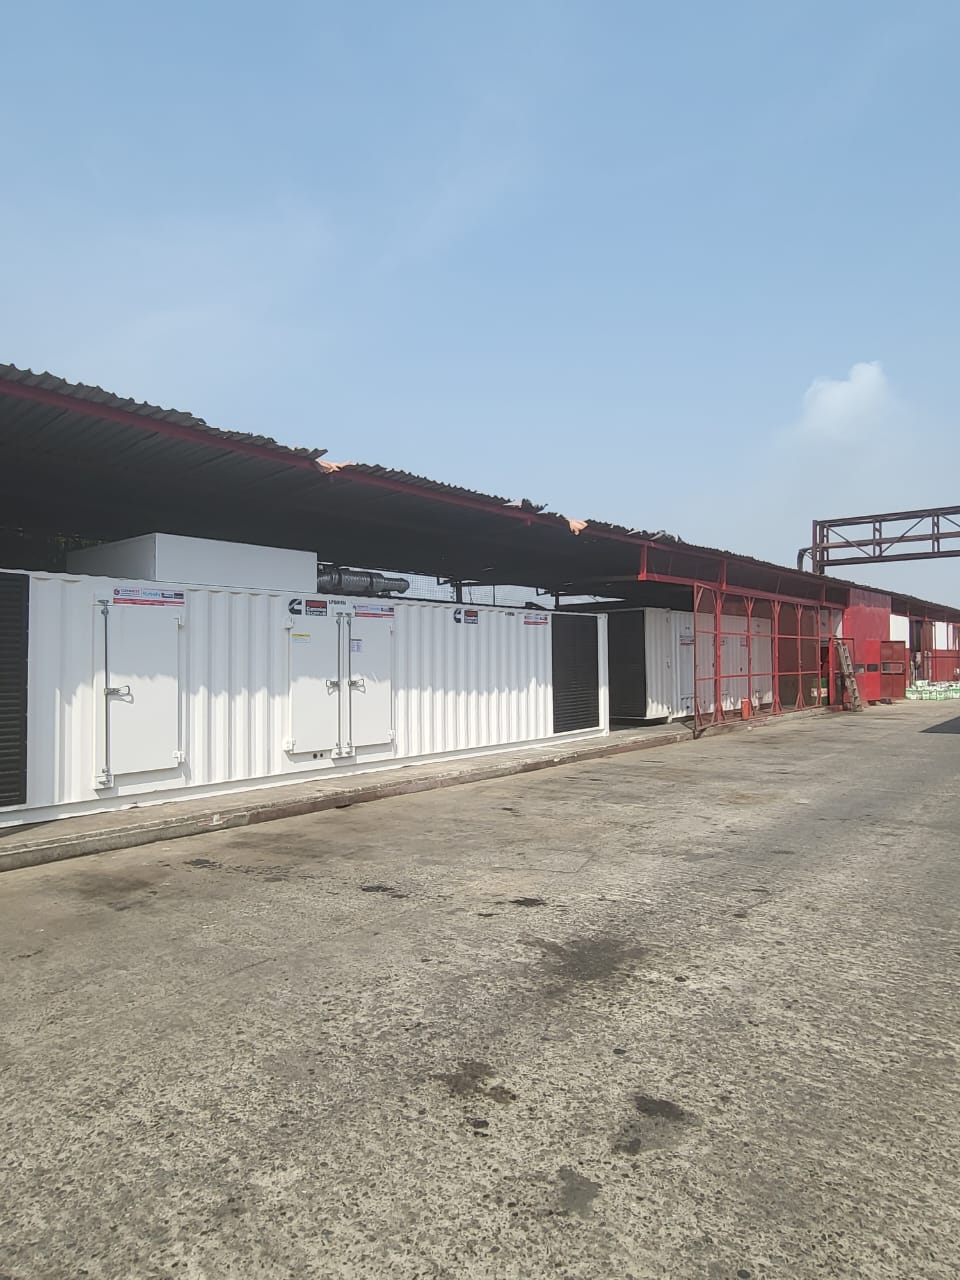 Completing the Power House for LG Facilities in Nigeria